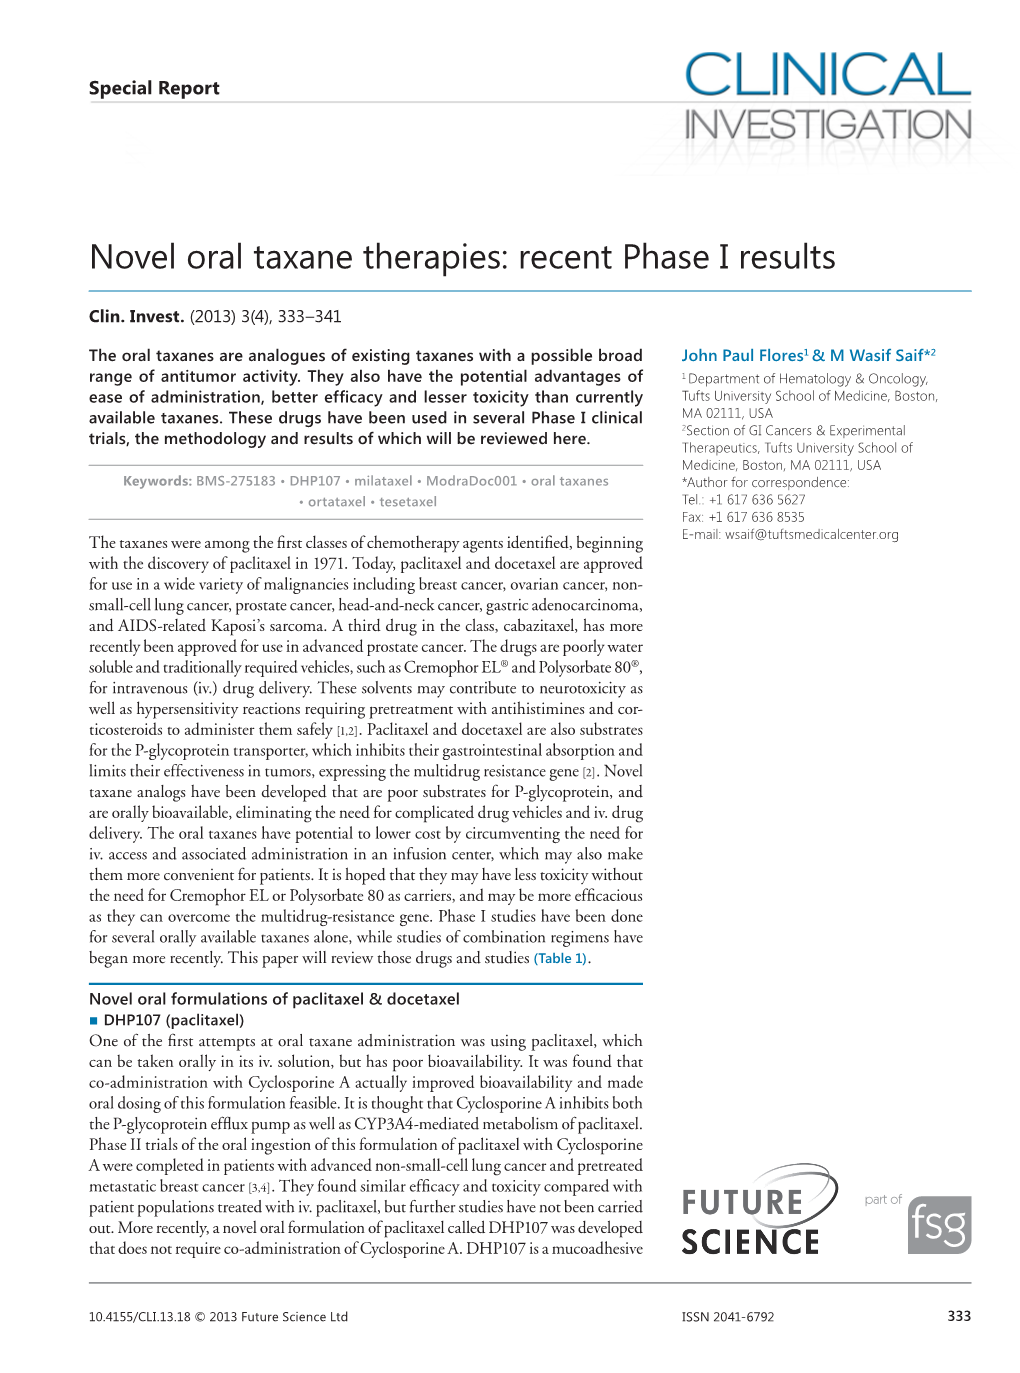 Novel Oral Taxane Therapies: Recent Phase I Results